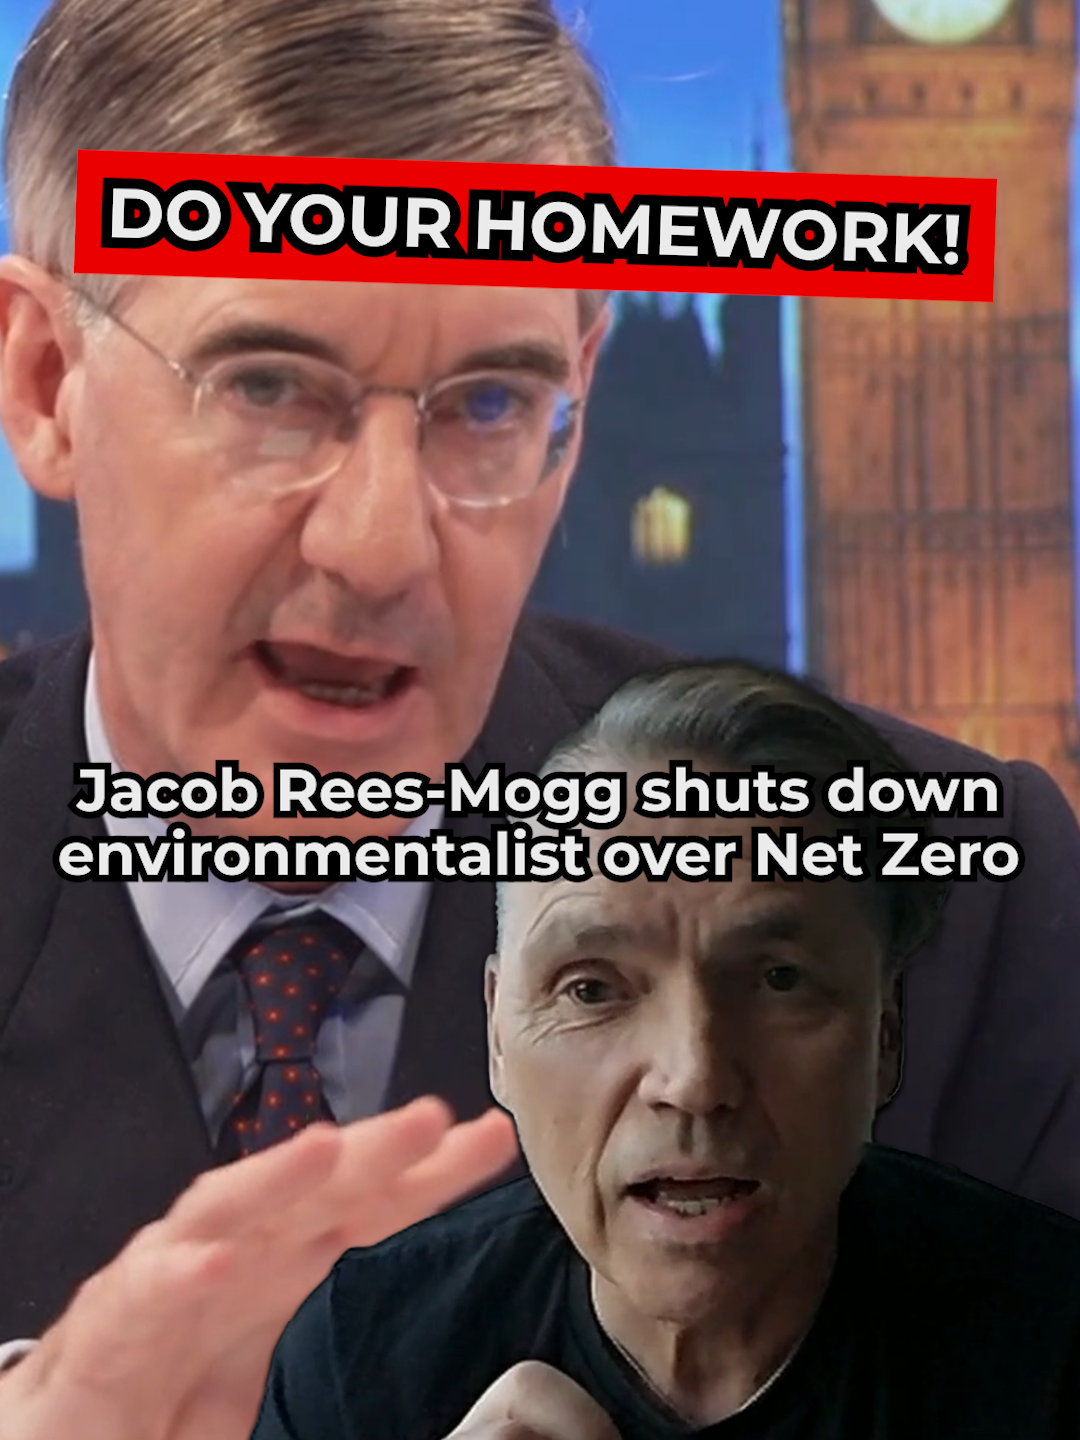 Jacob Rees-Mogg clashes with founder of Ecotricity and Labour Party donor, Dale Vince, over Net Zero, telling the guest to 'do your homework.' #netzero #environment #JacobReesMogg #DaleVince #GBNews